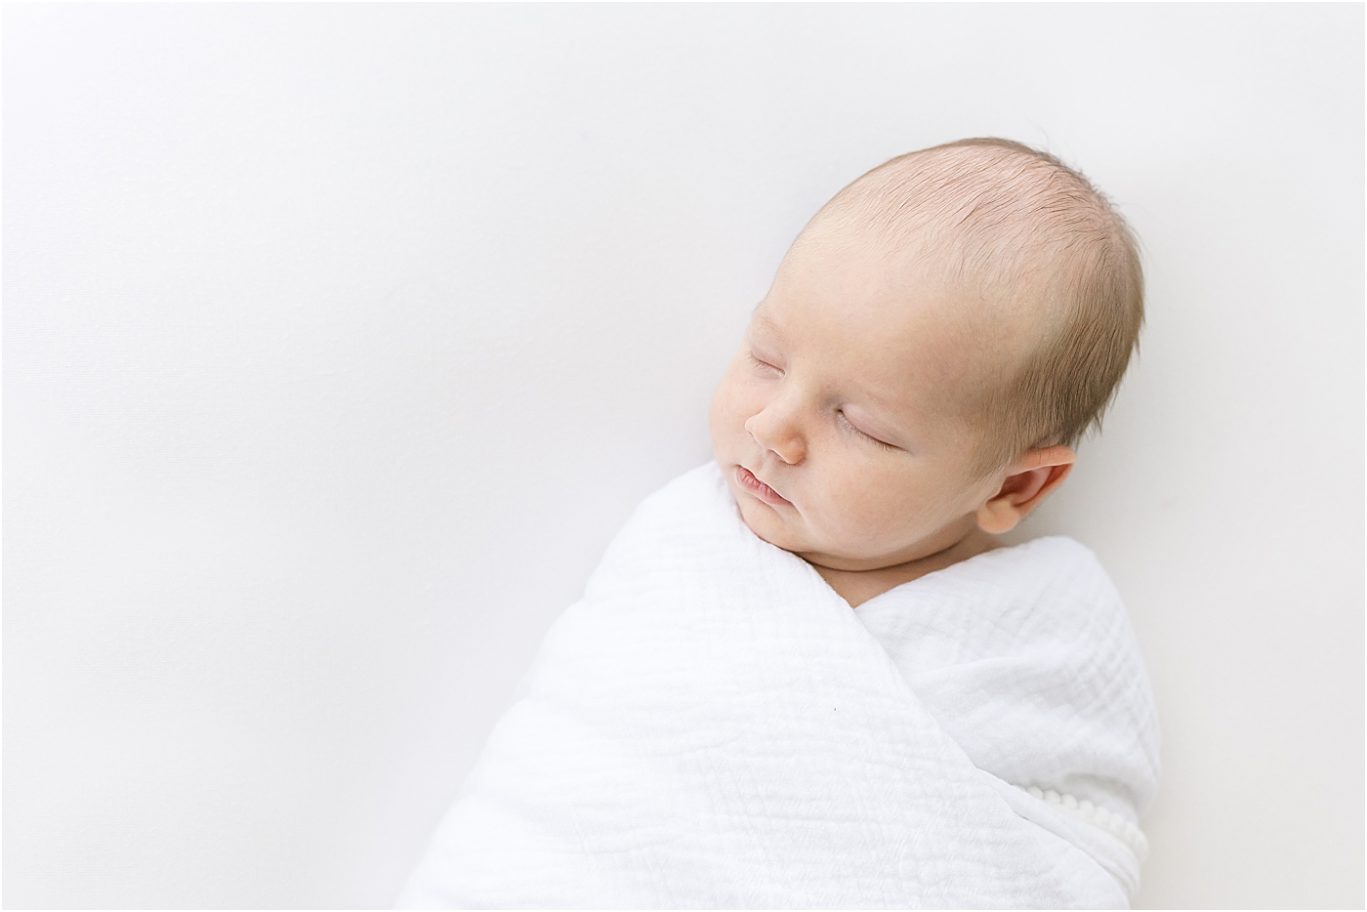 Baby boy sleeping for newborn session with Lindsay Konopa Photography in Fishers.